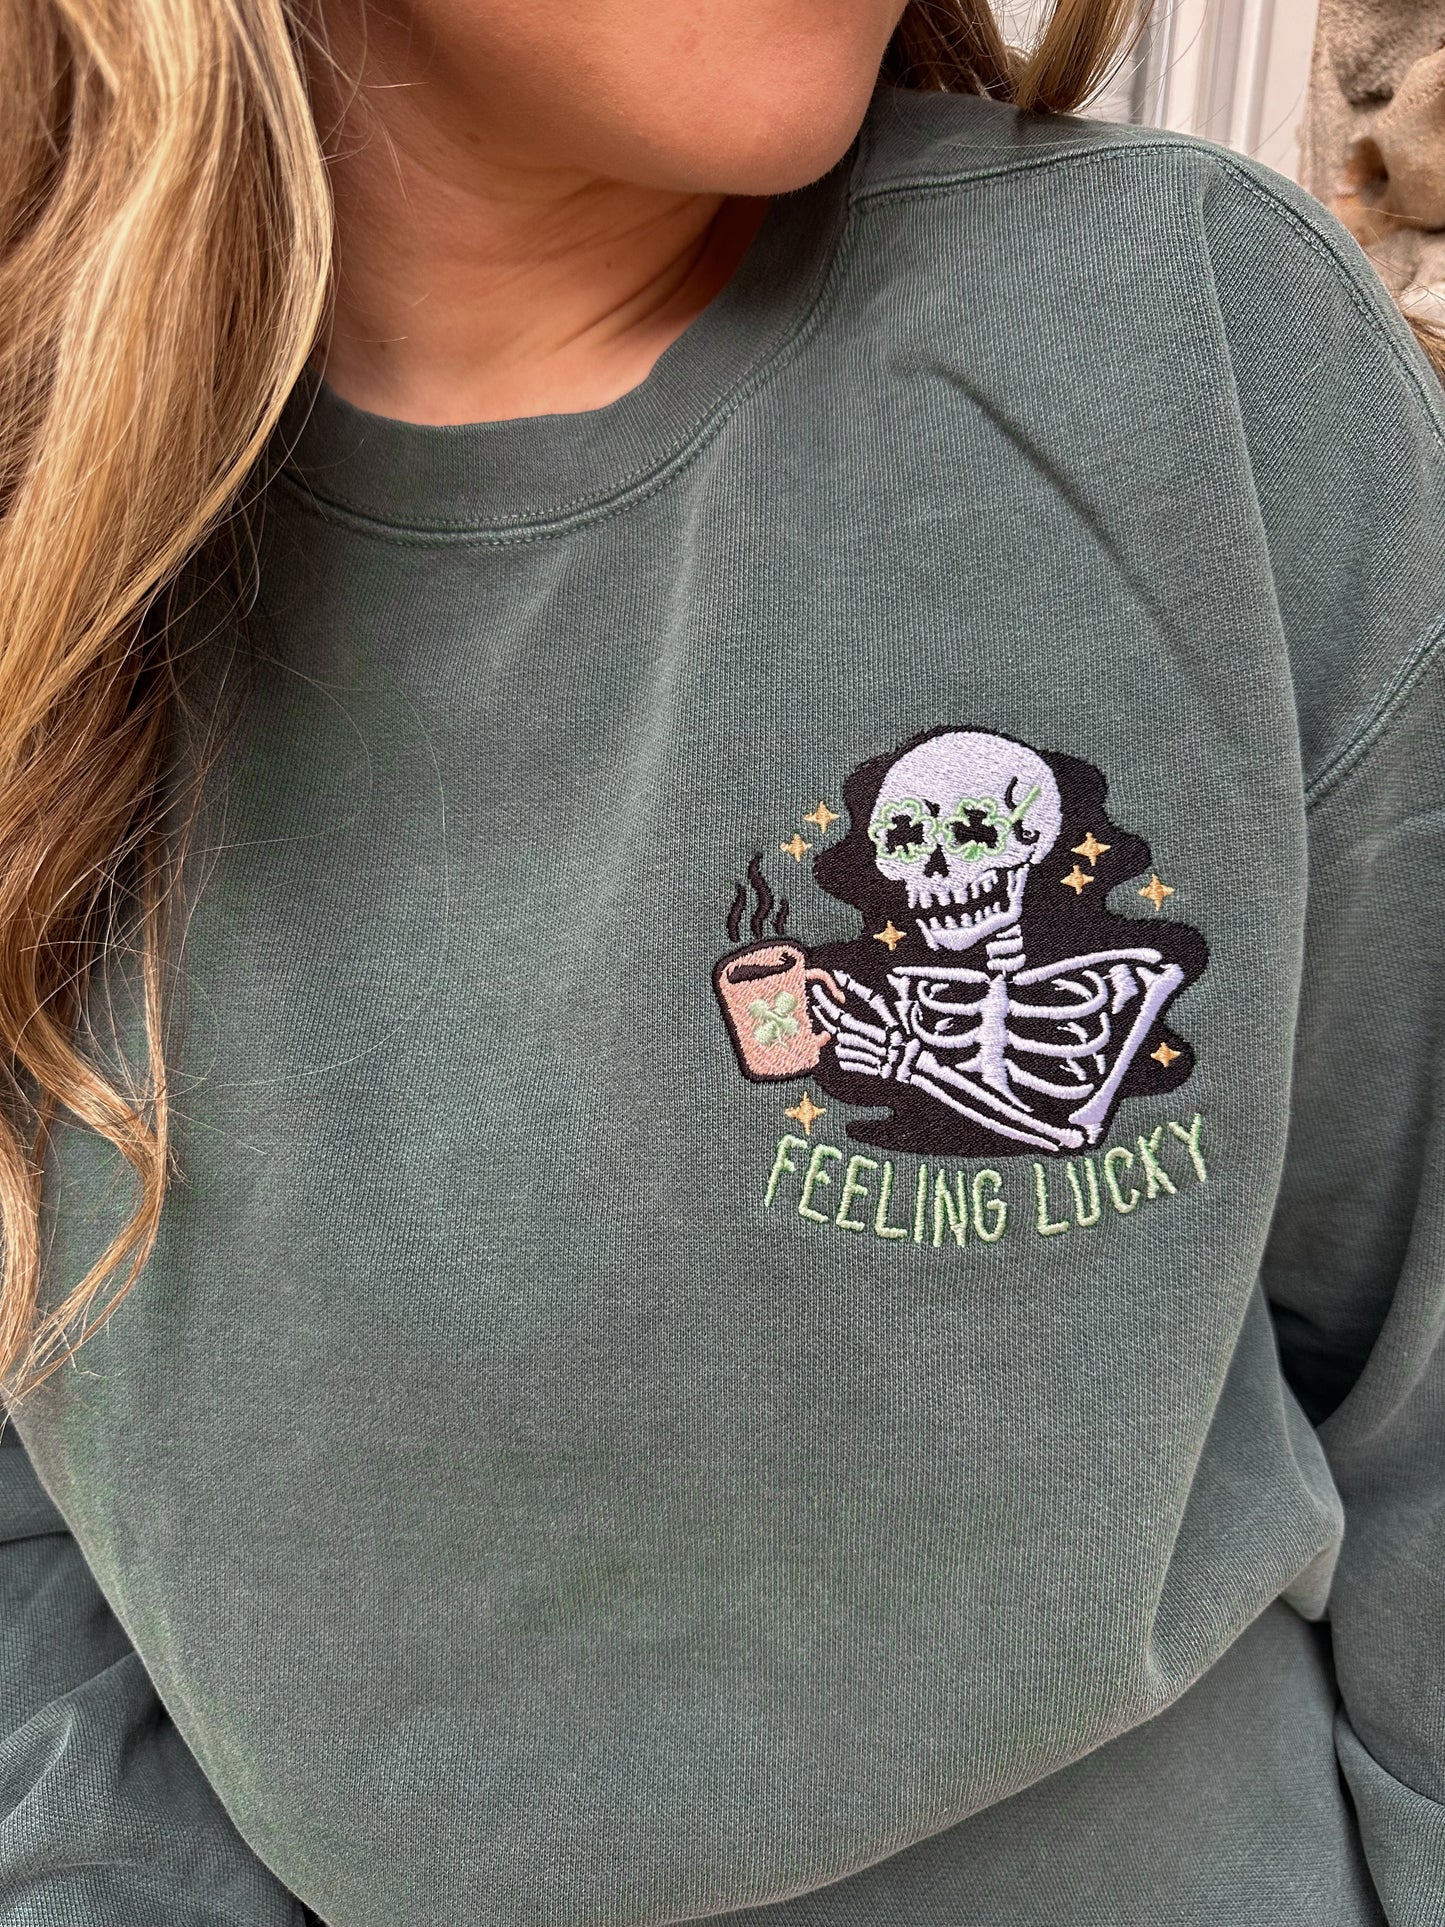 Feeling Lucky - Embroidered Sweatshirt (Blue Spruce)